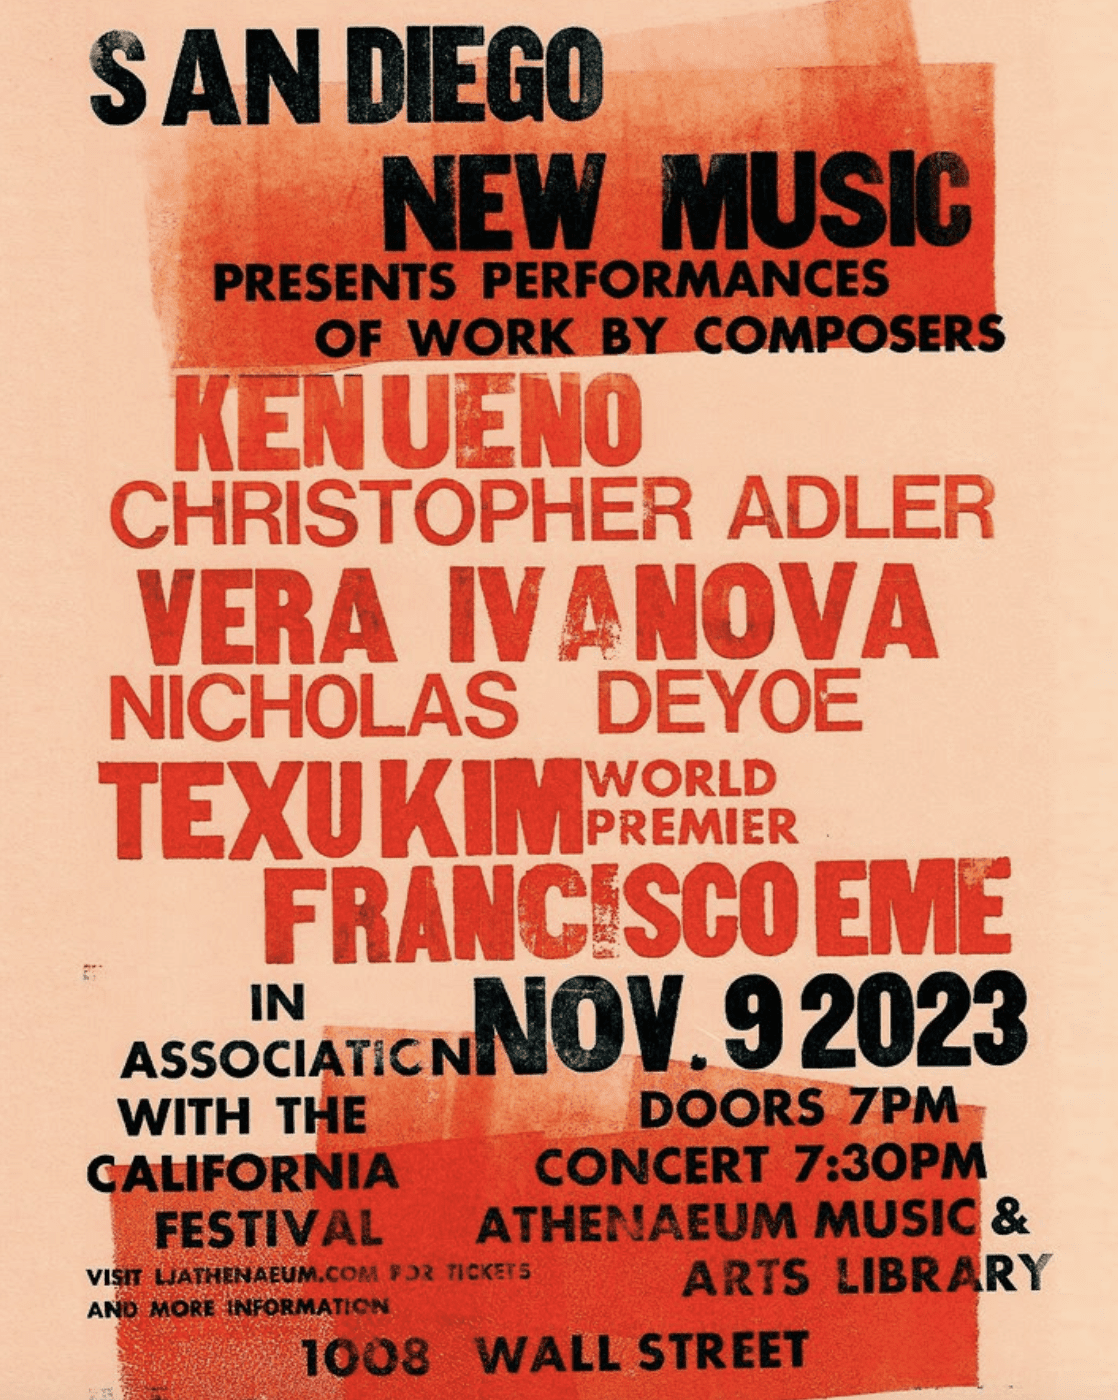 San Diego New Music festival poster